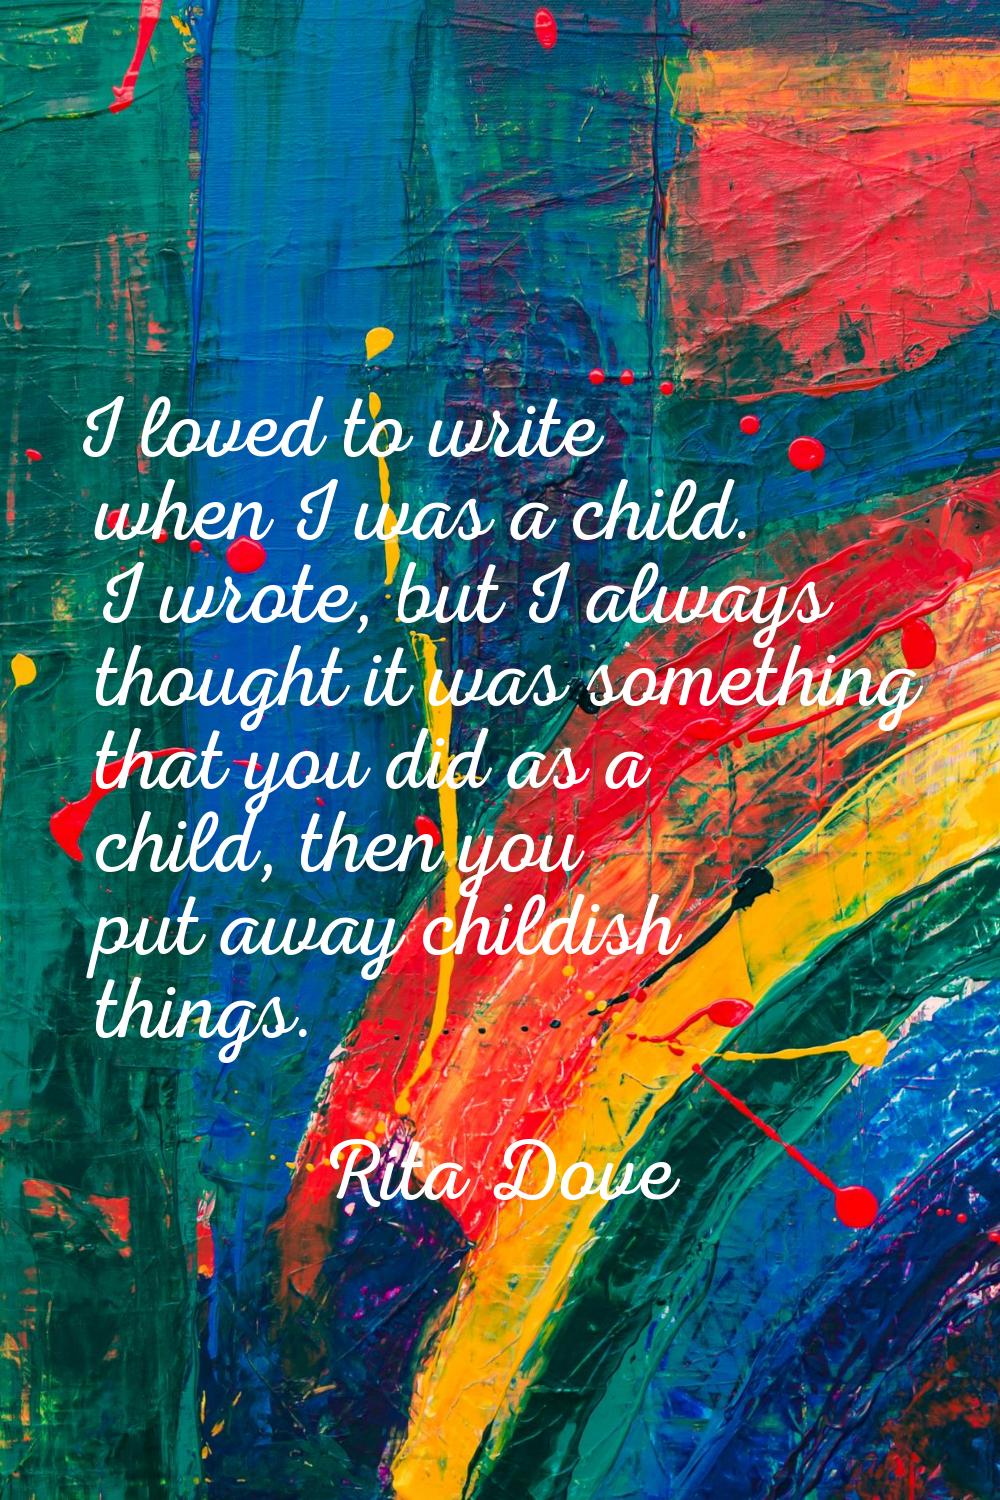 I loved to write when I was a child. I wrote, but I always thought it was something that you did as